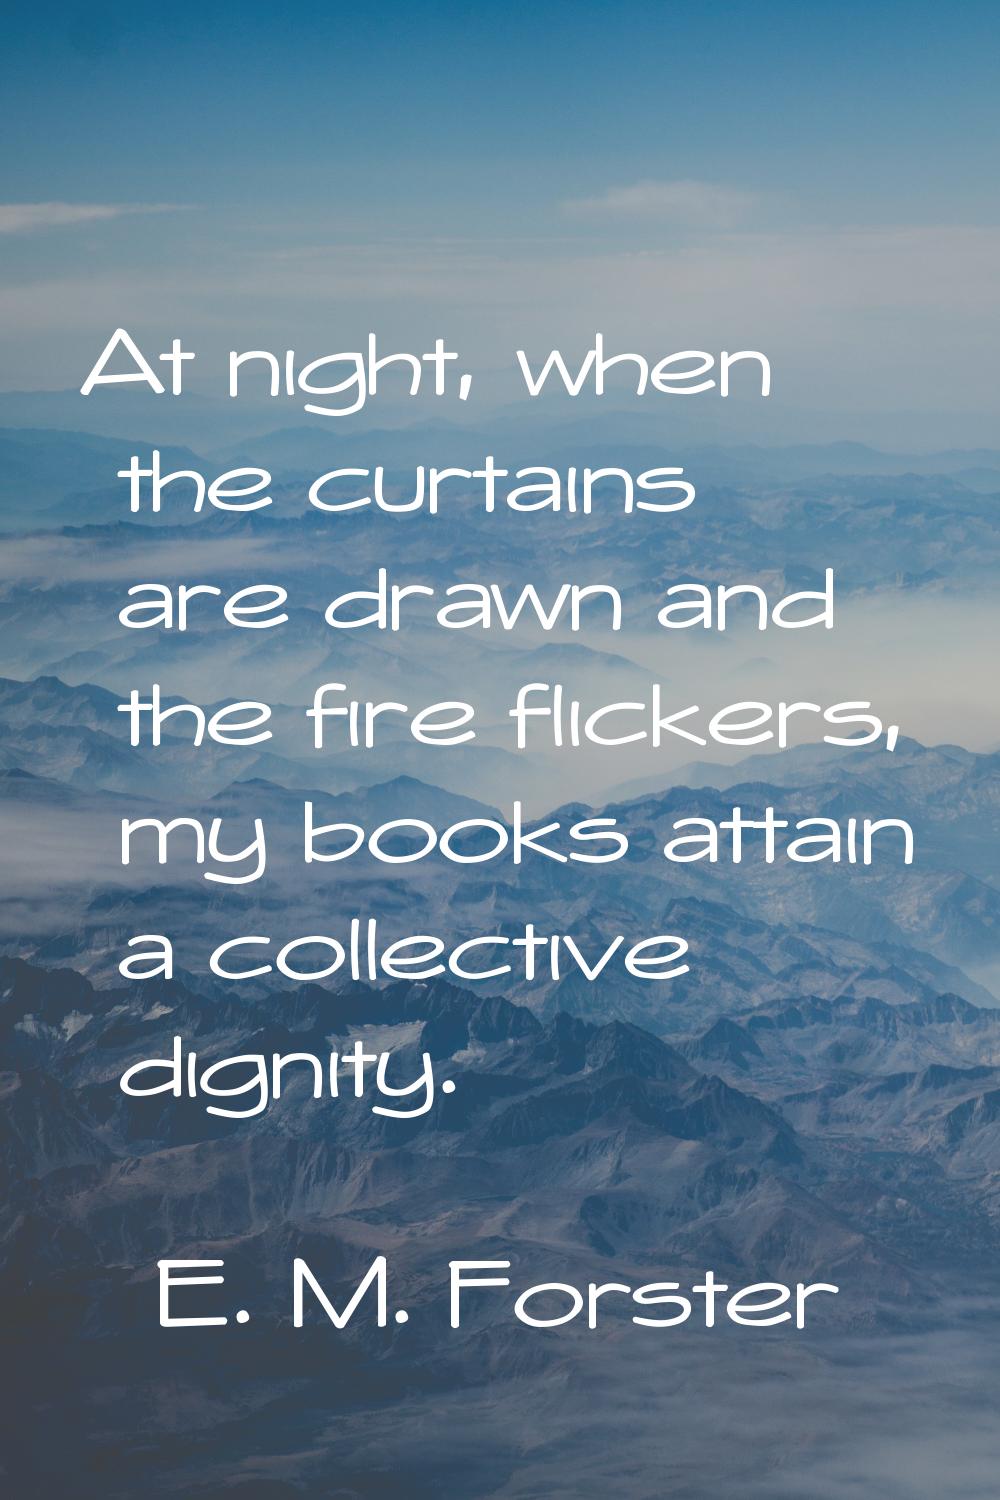 At night, when the curtains are drawn and the fire flickers, my books attain a collective dignity.